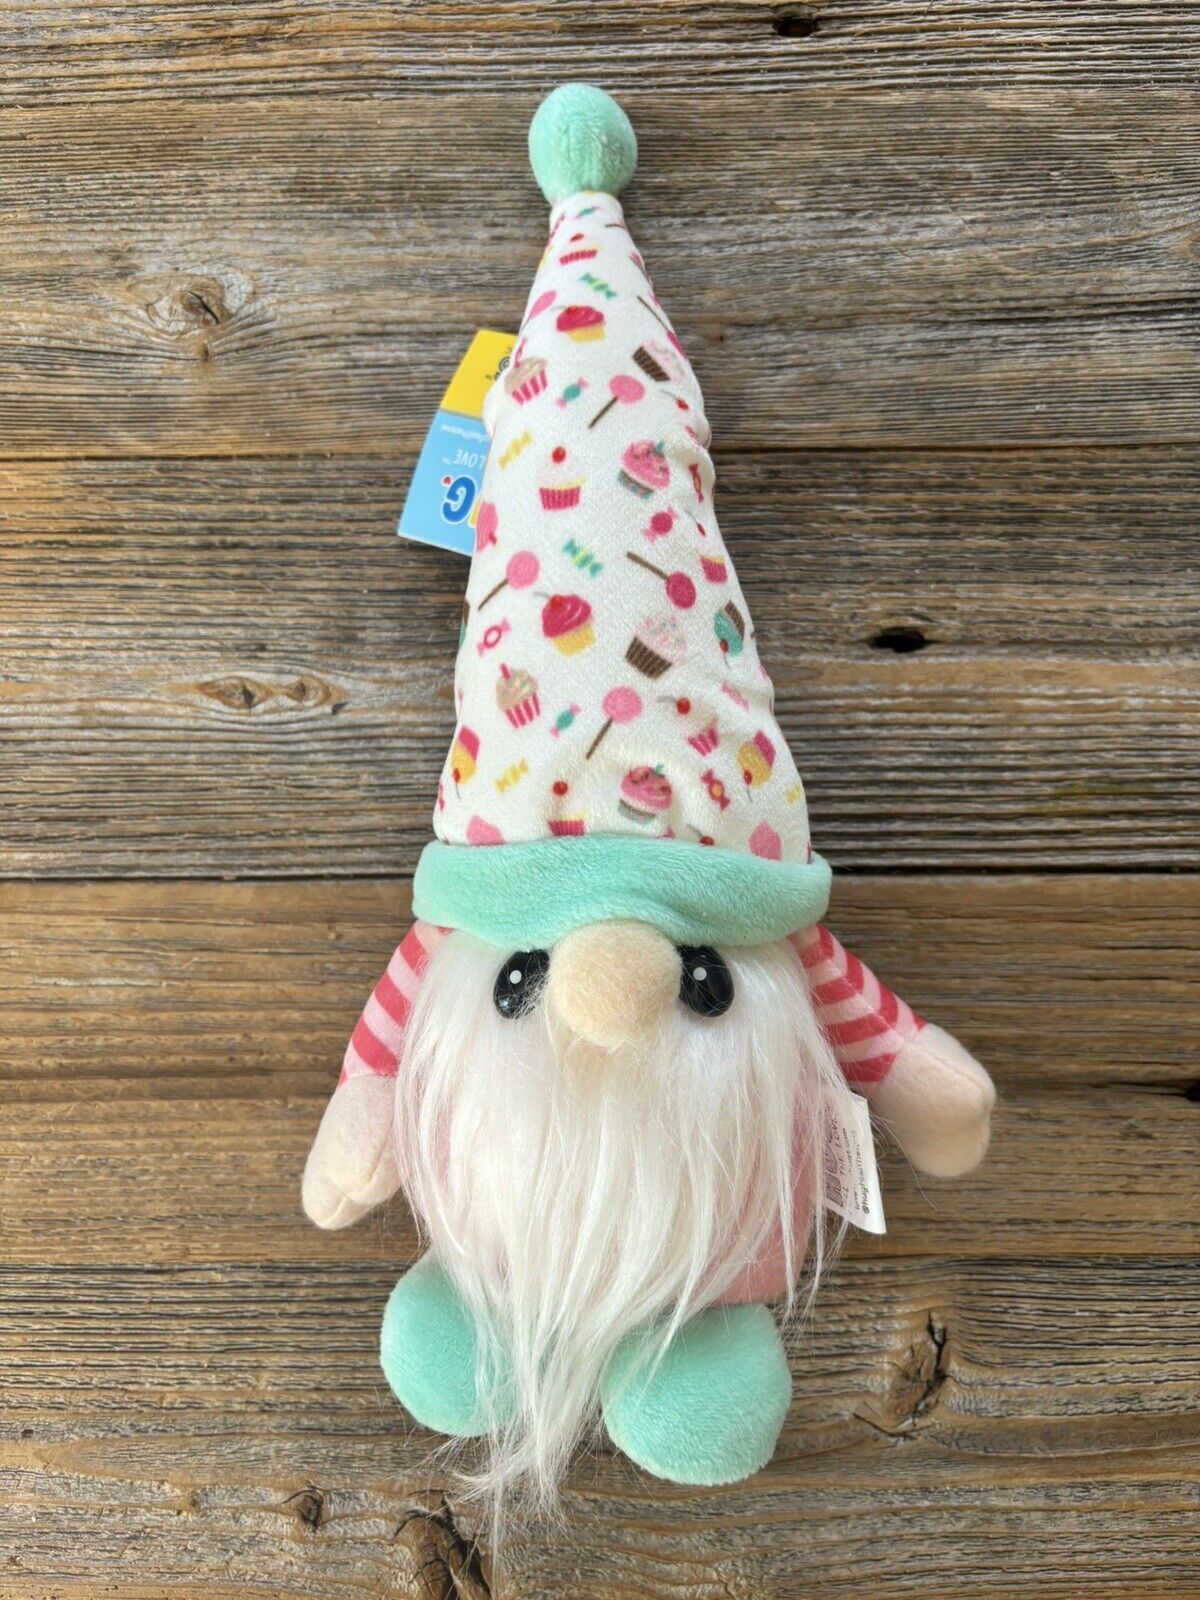 HUG Feel The Love Plush Gnomie Collection HAPPY Loves Cupcakes Donuts All Sweets